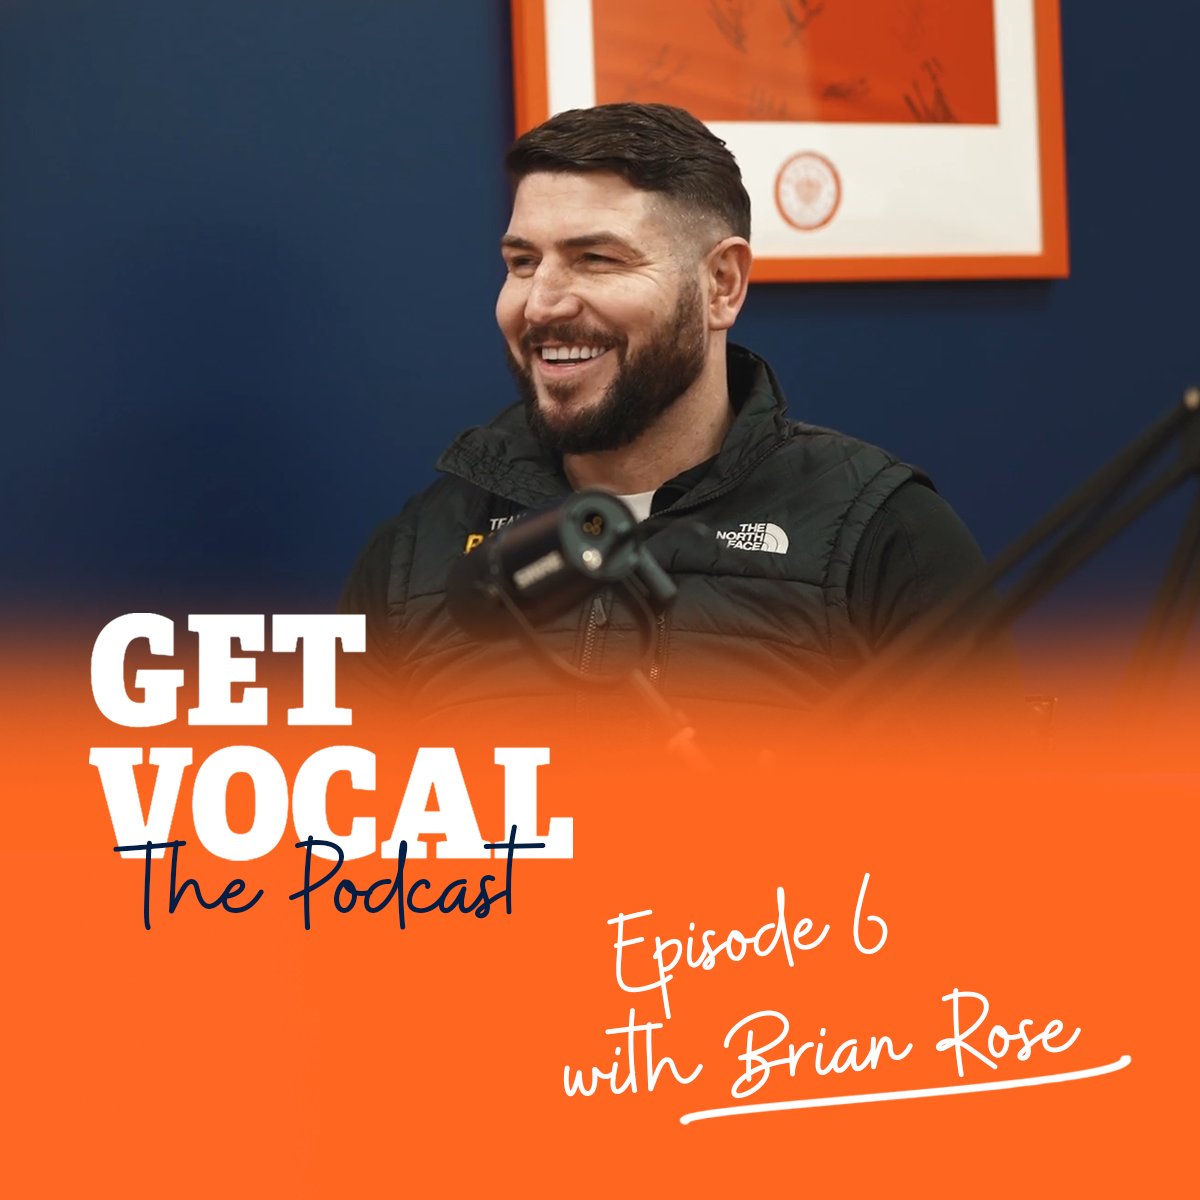 🎙️𝐆𝐞𝐭 𝐕𝐨𝐜𝐚𝐥 𝐏𝐨𝐝𝐜𝐚𝐬𝐭: 𝐄𝐩𝟔🎙️ @Brian_Lion_Rose discusses his career and mental health experience in and out of the ring. Listen here 👉🏻 bit.ly/BFCCTGetVocal *(Explicit - Strong language used throughout)* @BpoolCouncil | @BlackpoolFC | @BRBoxingAcademy